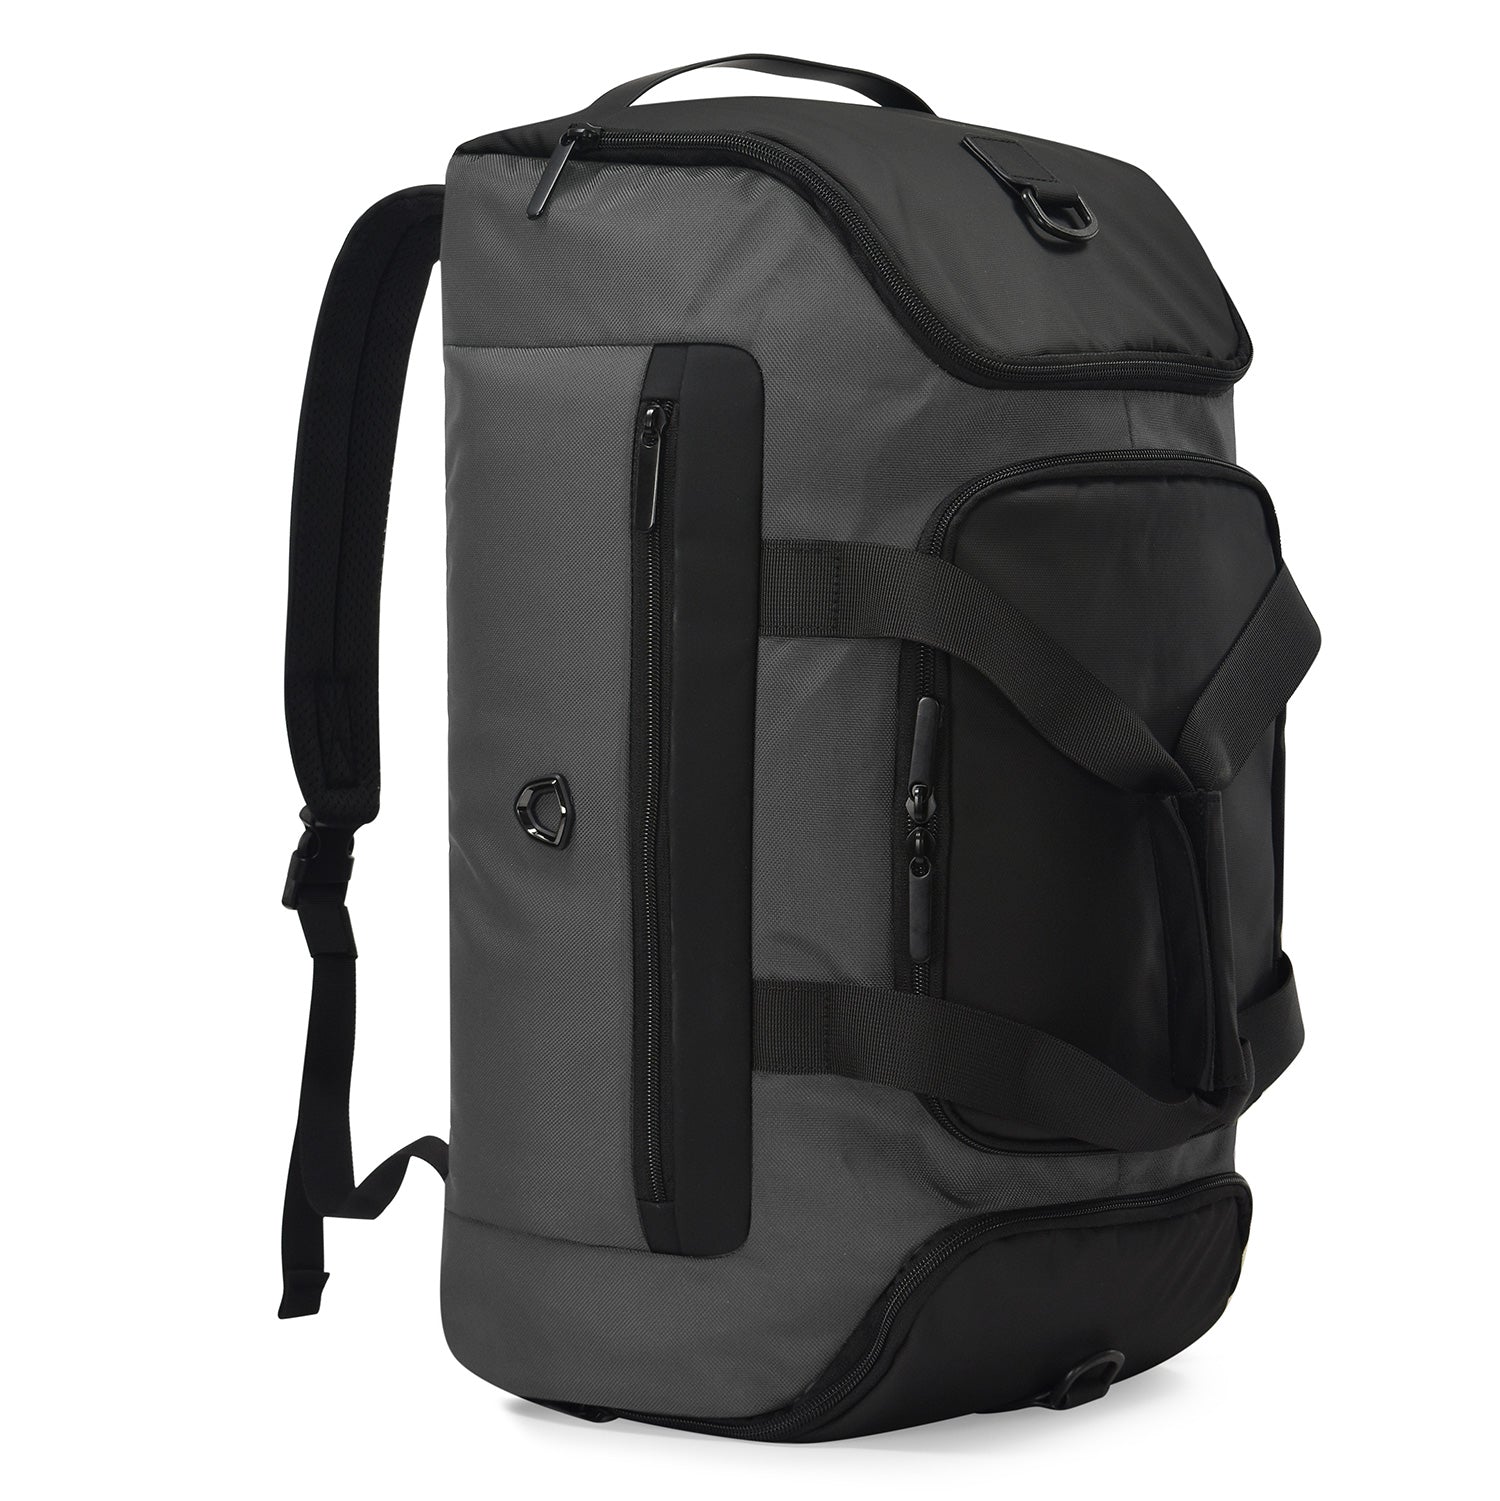 CROSSFIT BACKPACK – Traveler's Choice Airline